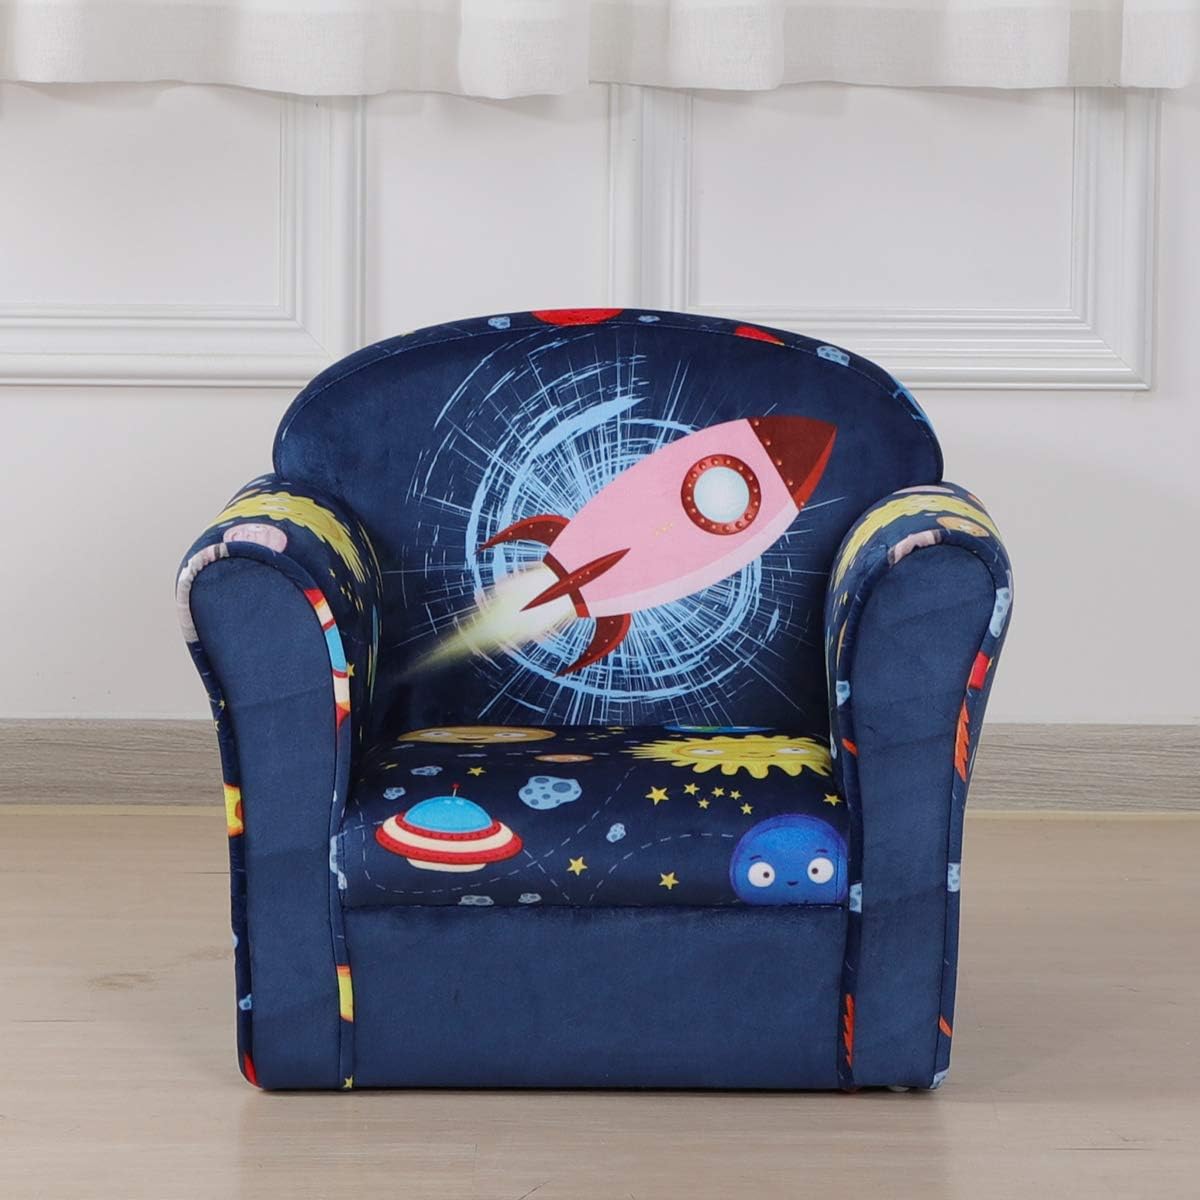 Baby Furniture Kid Sofa Upholstered, Children’s Chairs With Arms